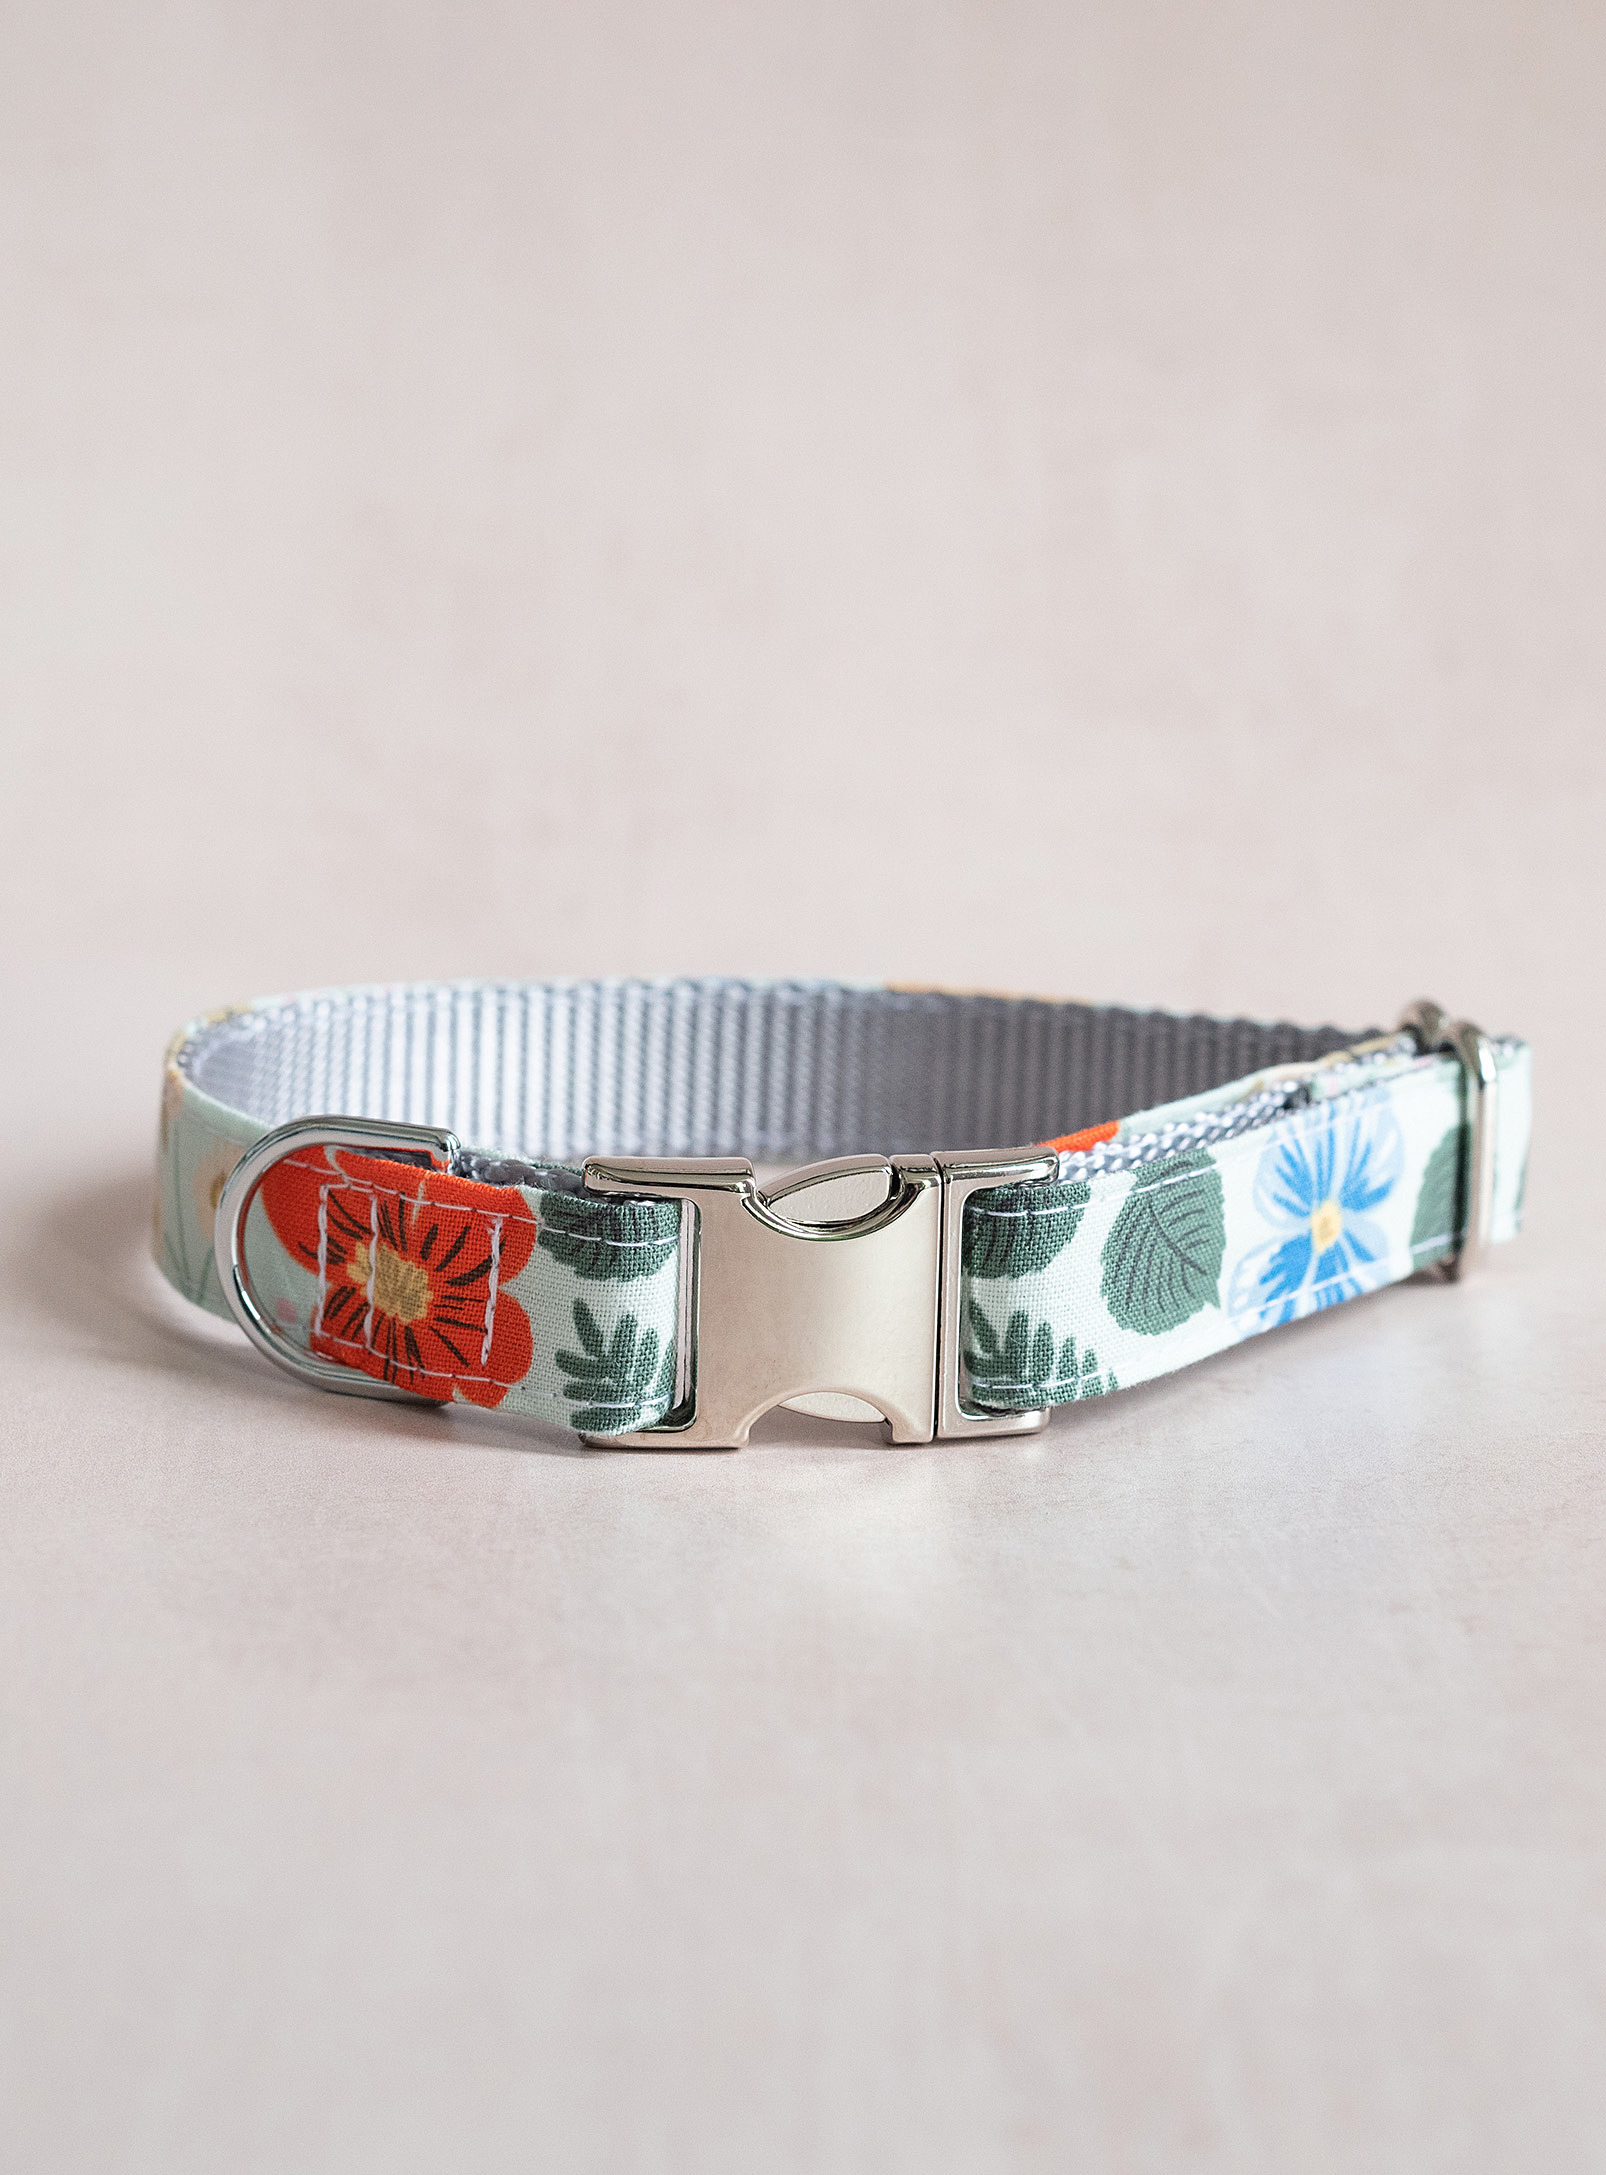 The Rover Boutique Colourful Pattern Dog Collar See Available Sizes In Assorted